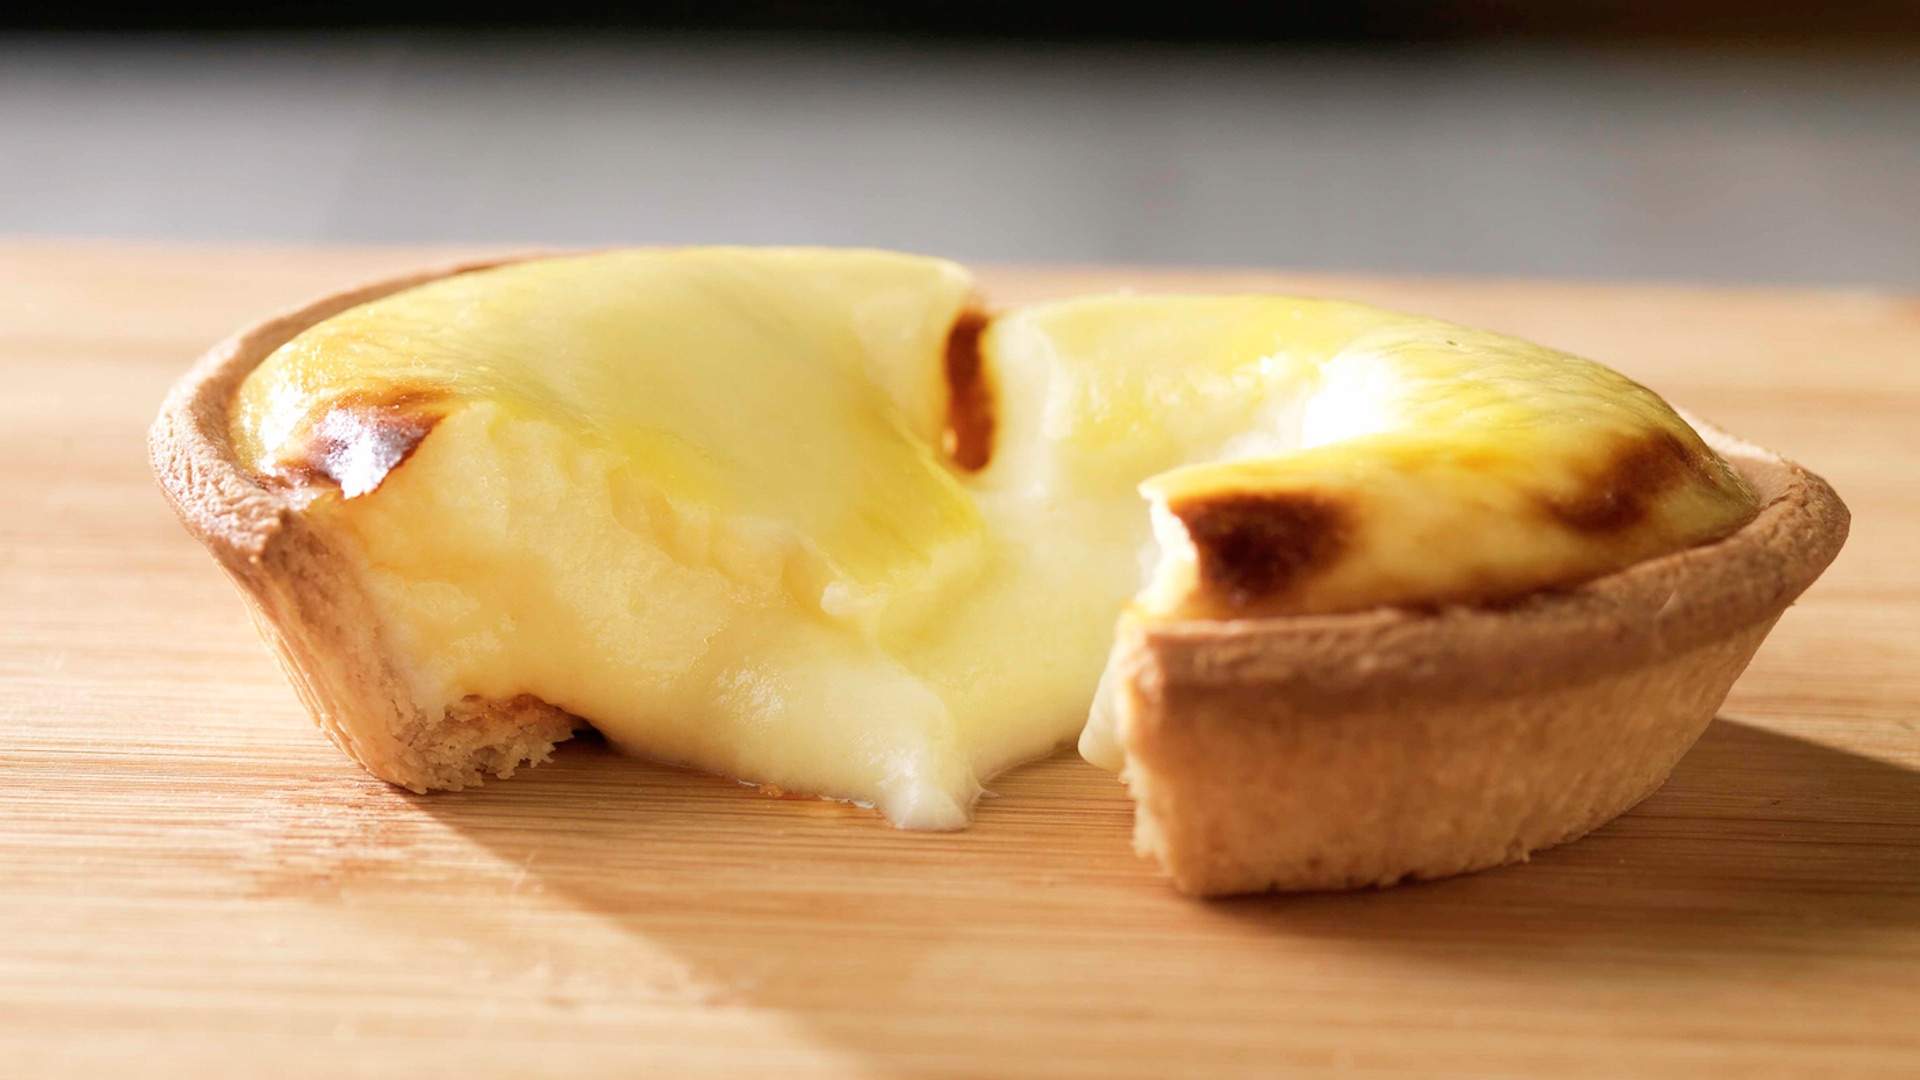 Malaysia's Insanely Popular Baked Three-Cheese Tarts Are Coming to Auckland